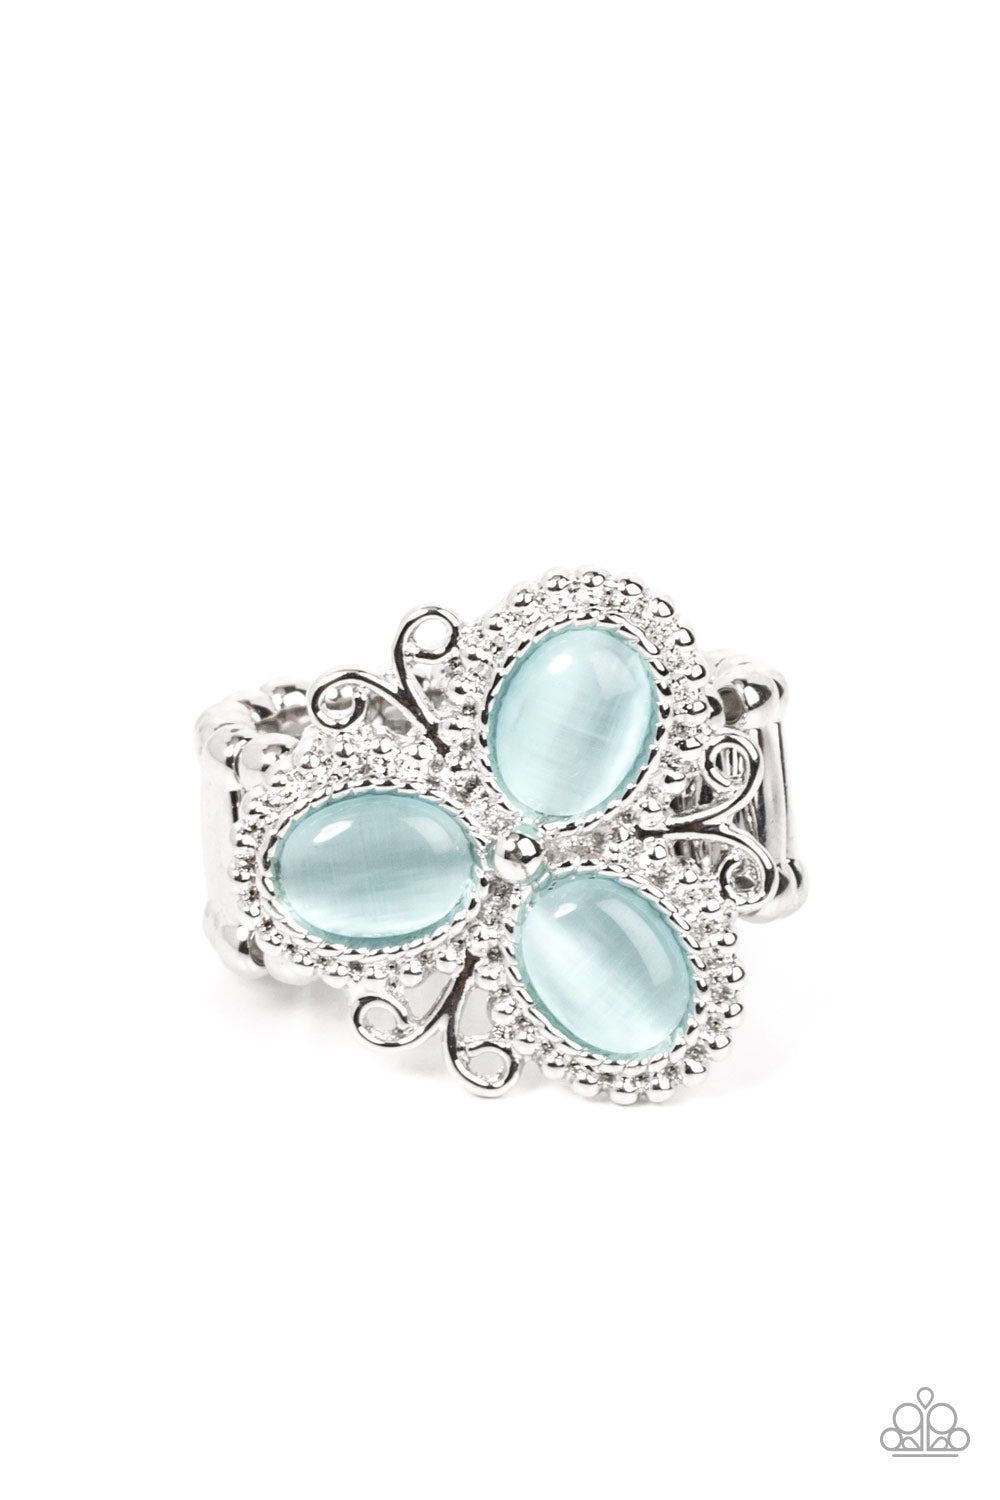 Bewitched Blossoms - Blue Cat's Eye Stone & Silver Filigree Paparazzi Ring